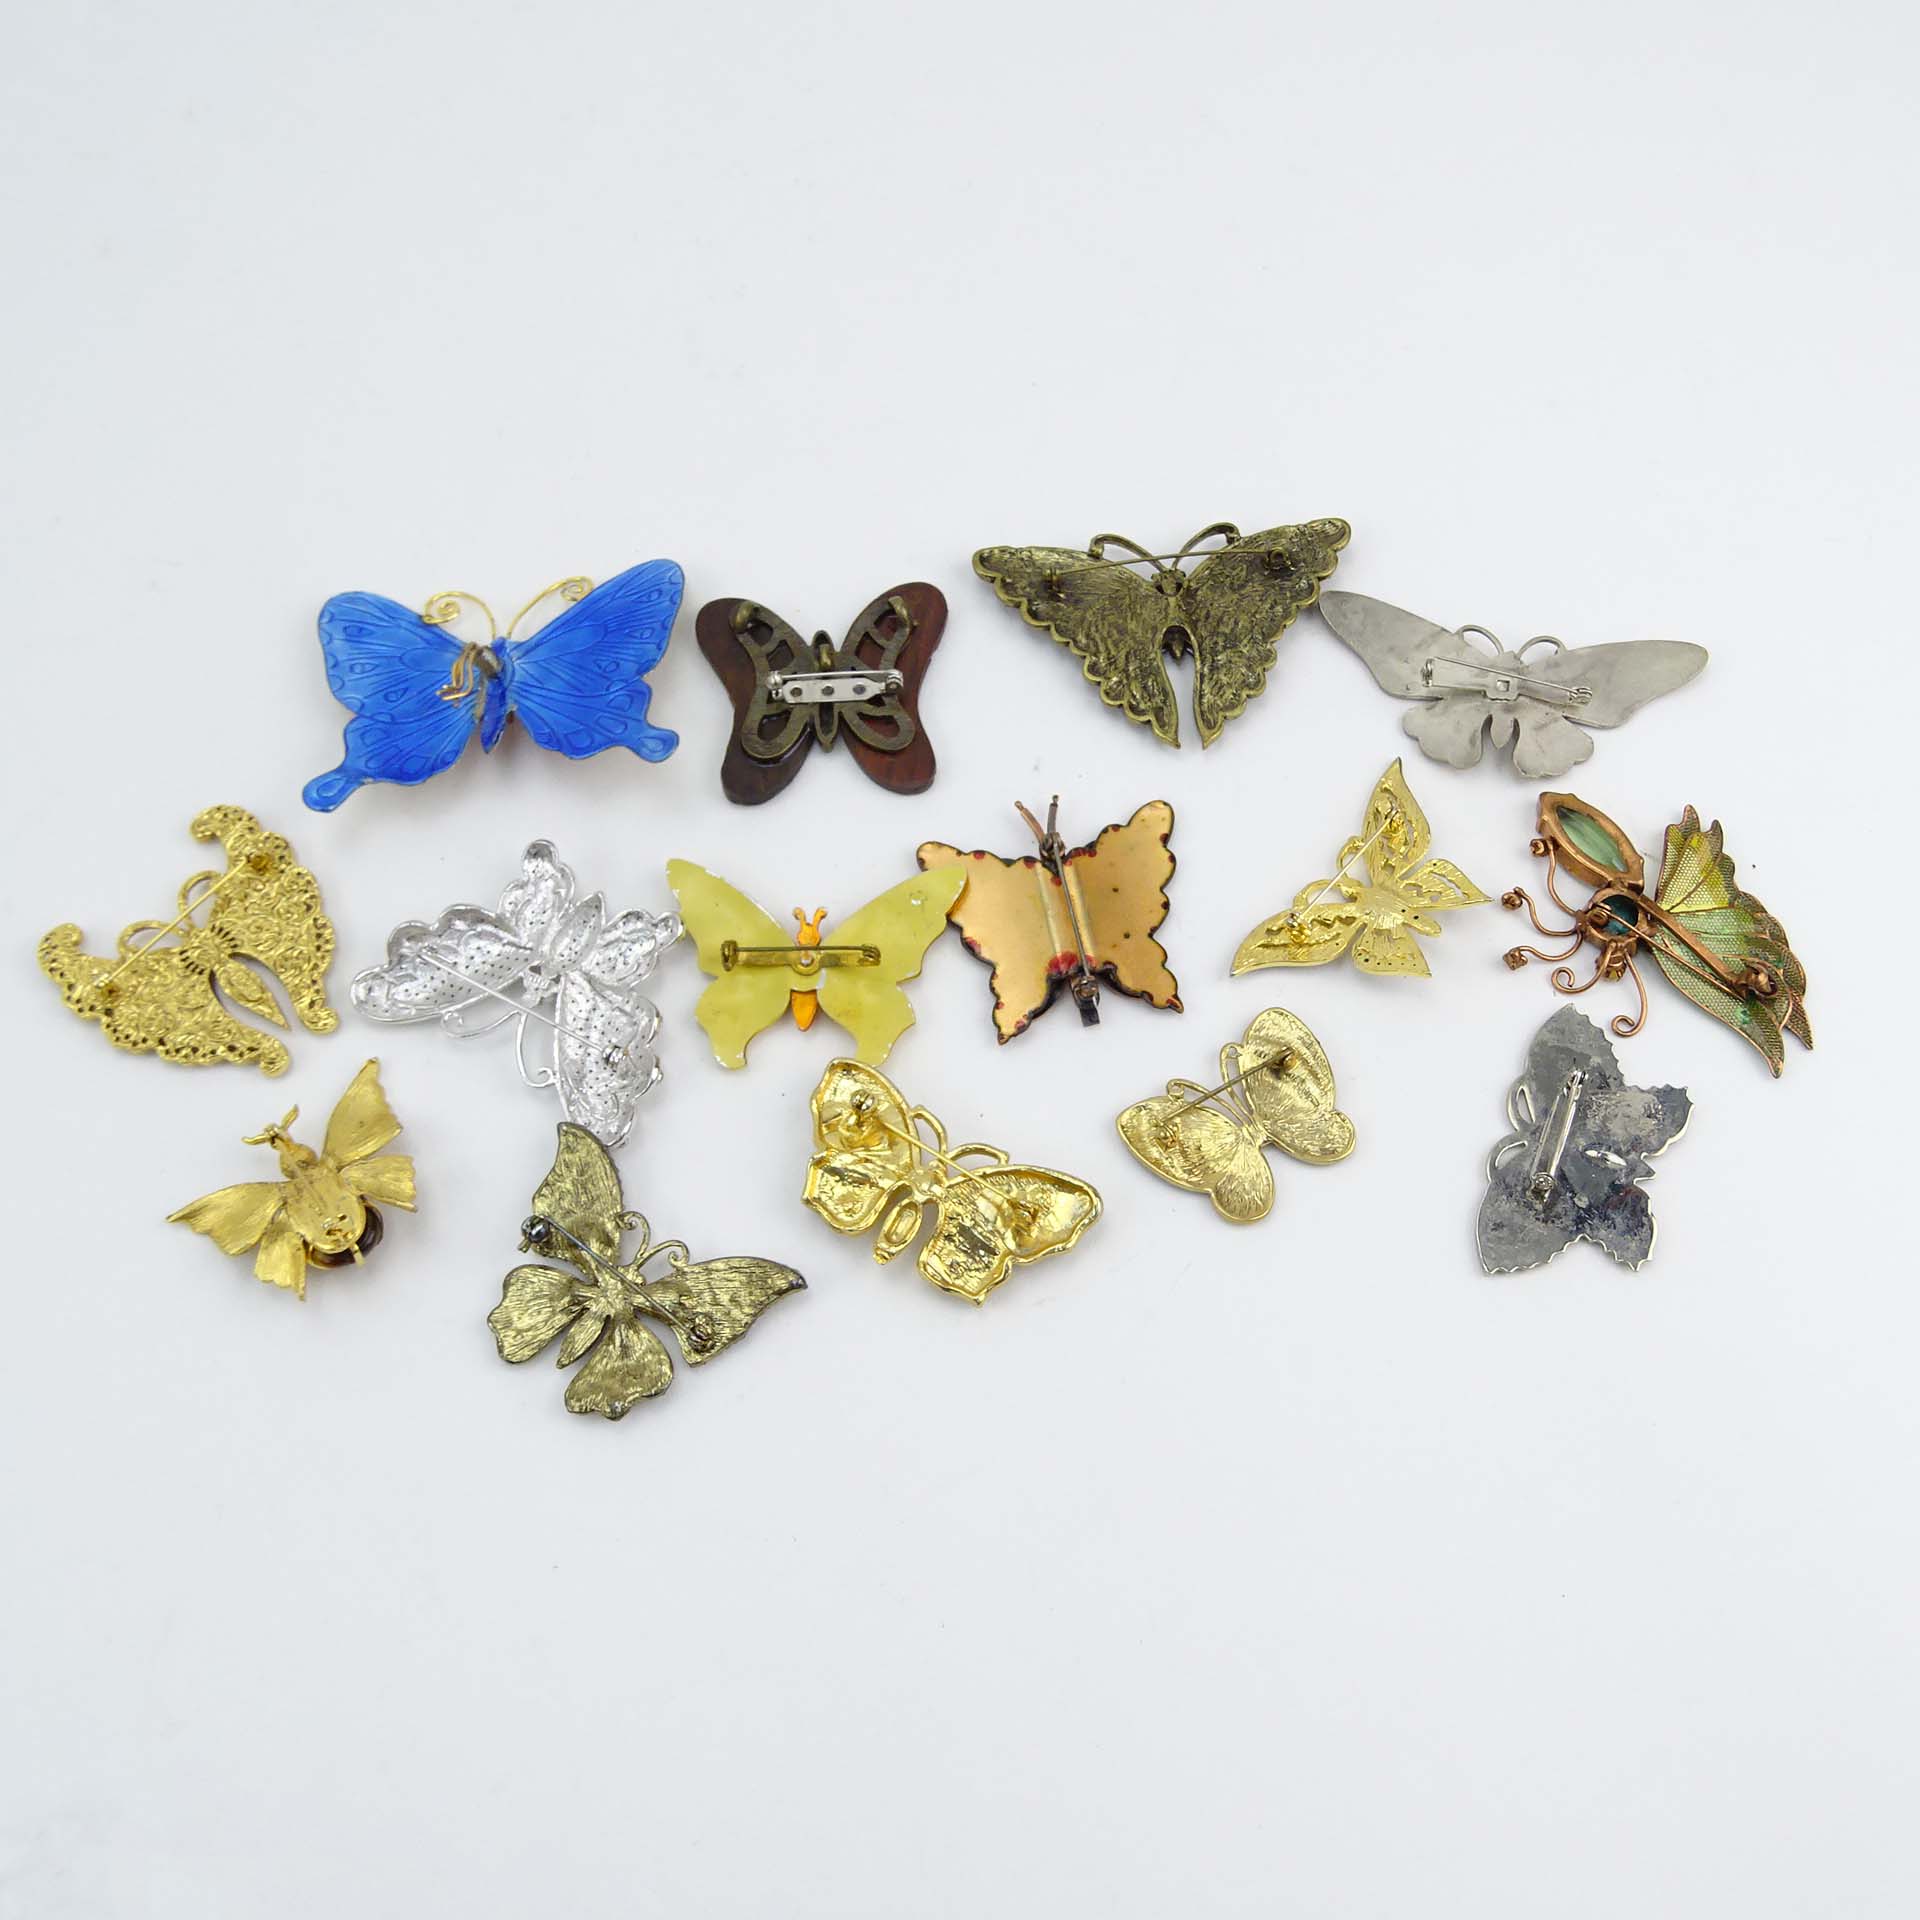 Collection of Fifteen (15) Fashion Butterfly Brooches decorated variously with enamel and faux gem stones.